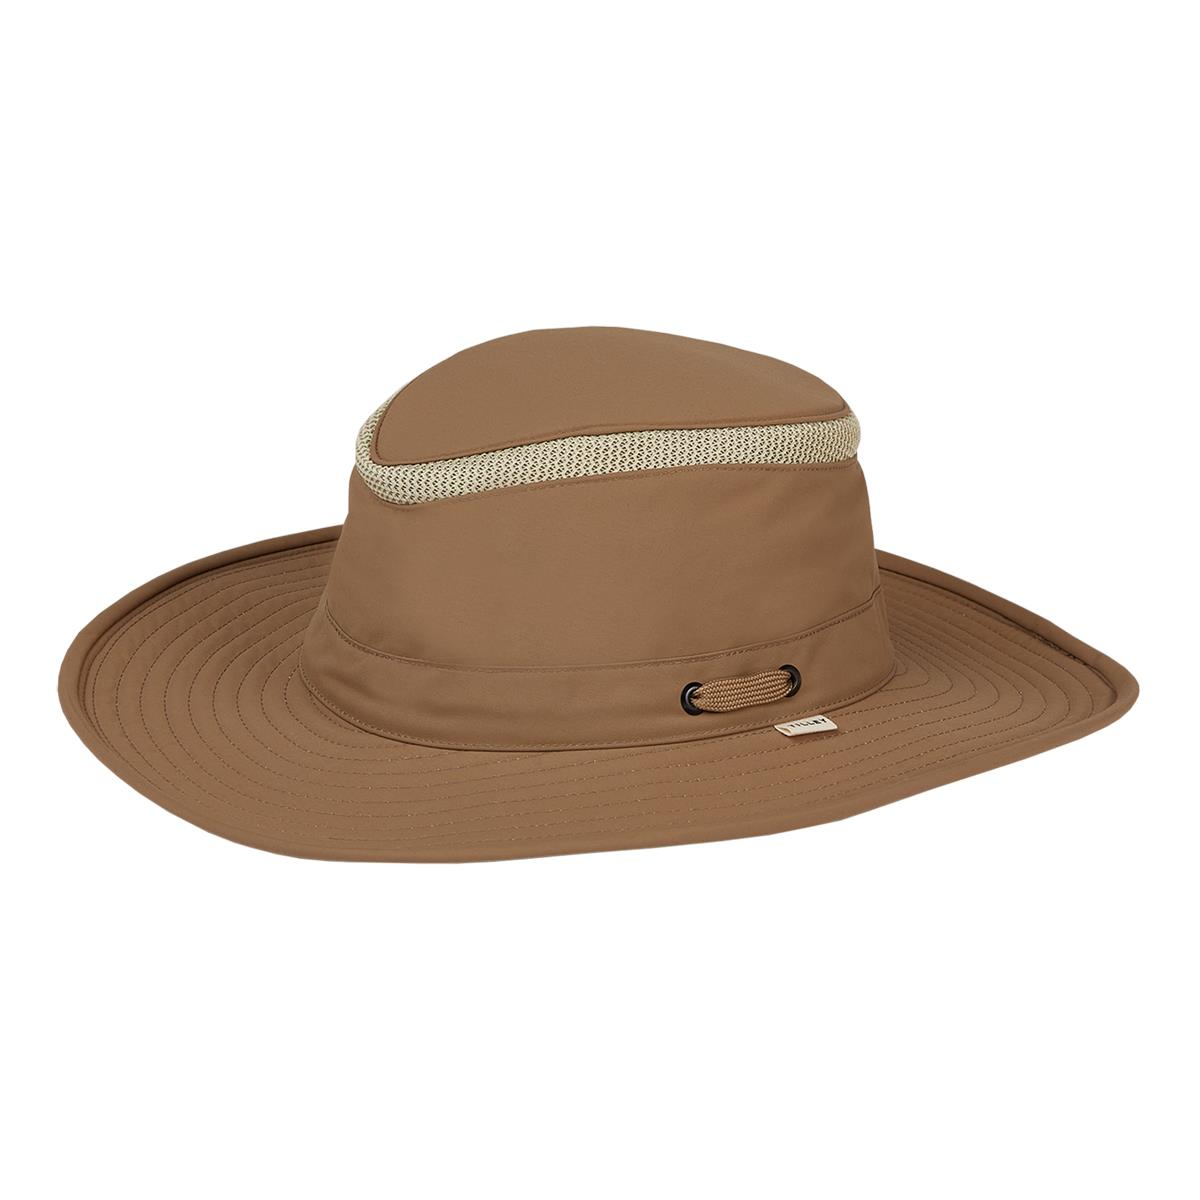 Can the LTM6 Tilley hat be washed?